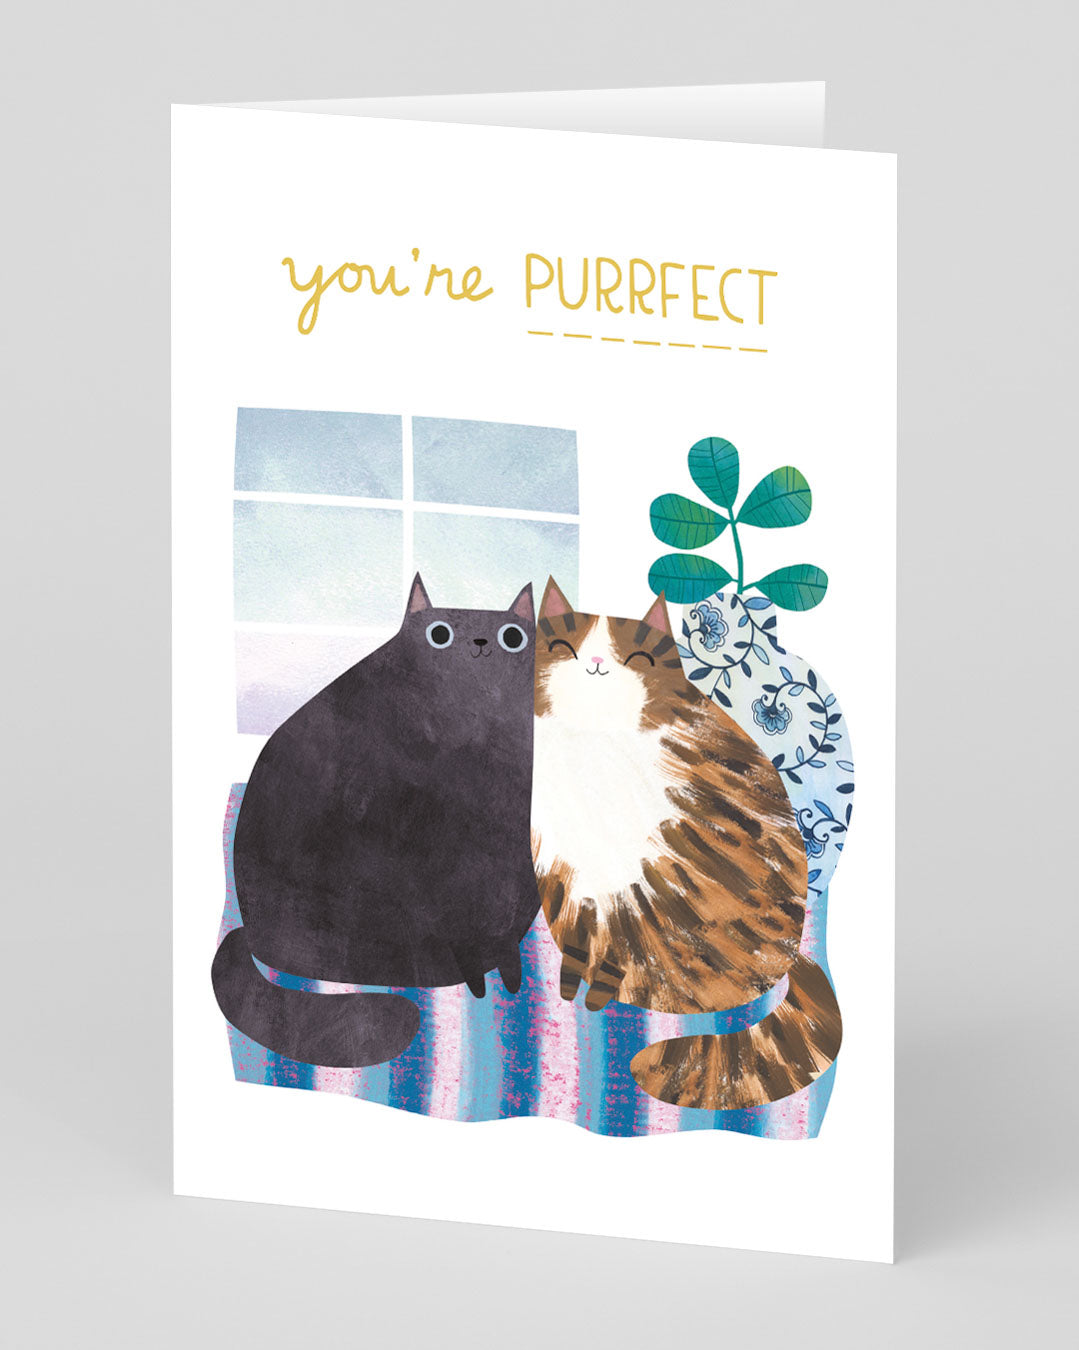 Valentine’s Day | Cute Valentines Card For Cat Lovers | Personalised Anniversary Cats Card | Ohh Deer Unique Valentine’s Card for Him or Her | Artwork by Angela Rozelaar | Made In The UK, Eco-Friendly Materials, Plastic Free Packaging